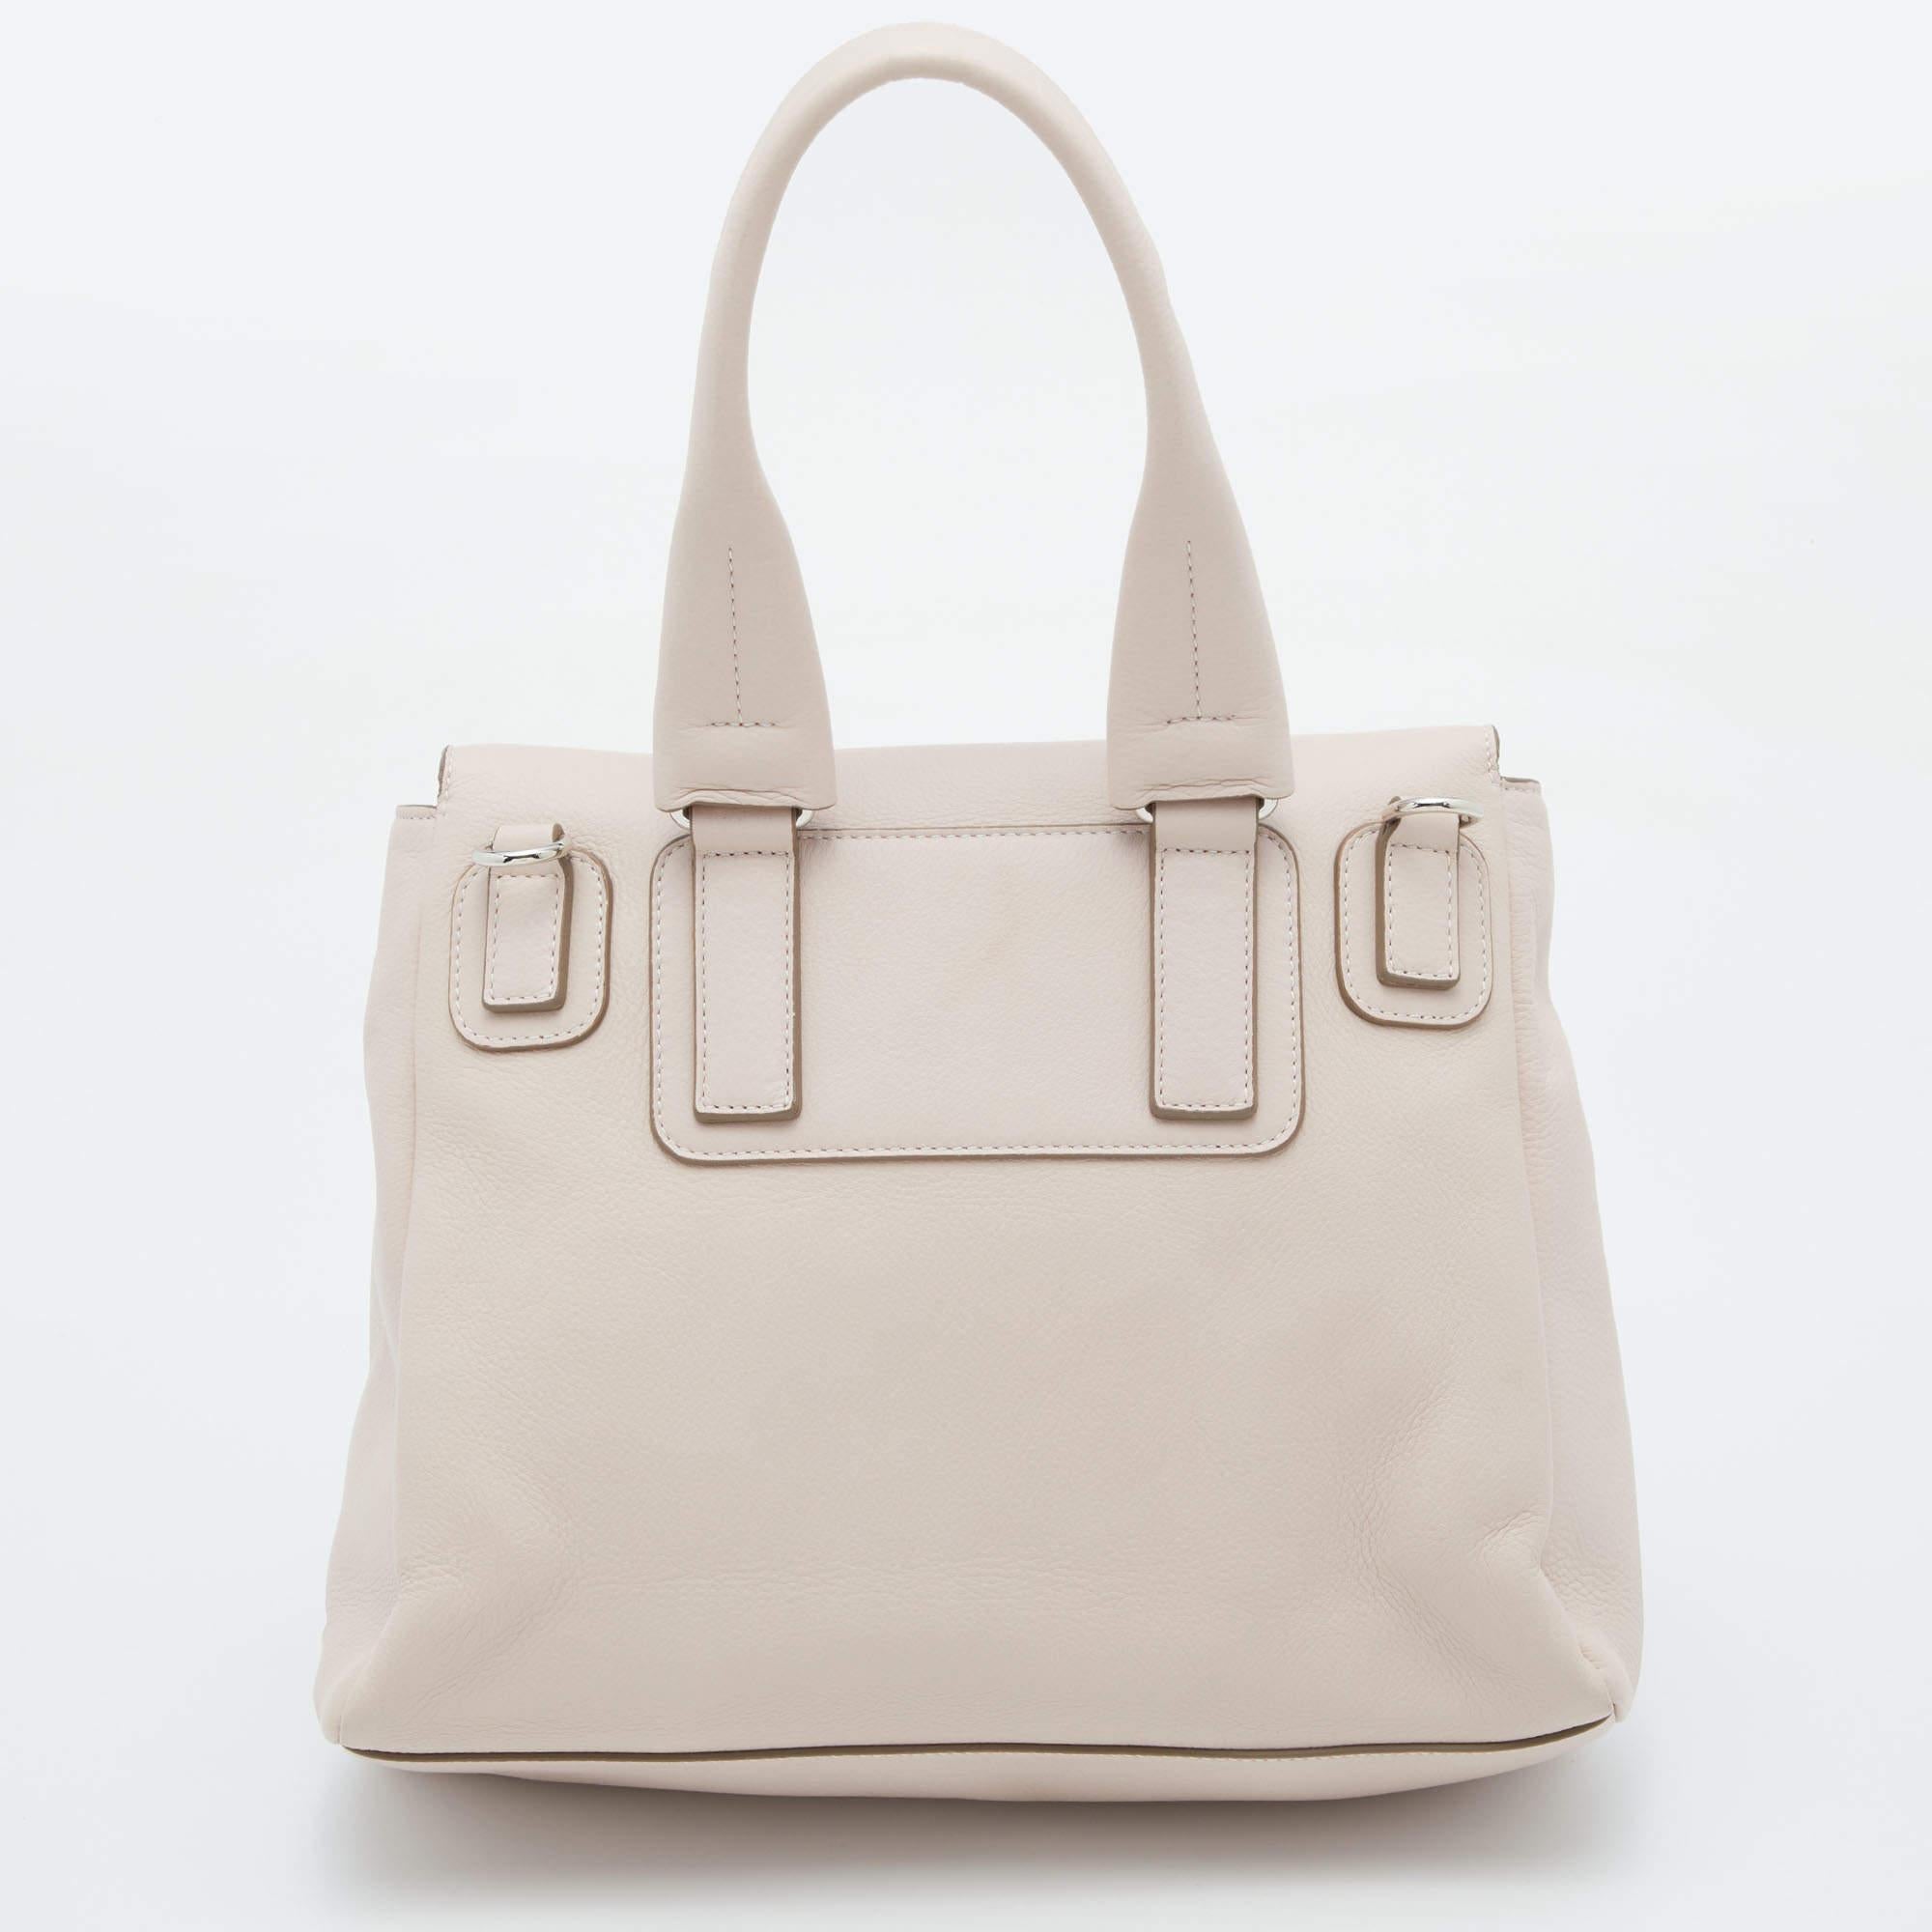 Designer bags are ideal companions for ample of occasions! Here we have a fashion-meets-functionality piece crafted with precision. It has been equipped with a well-sized interior that can easily fit in all your essentials.

Includes: Original